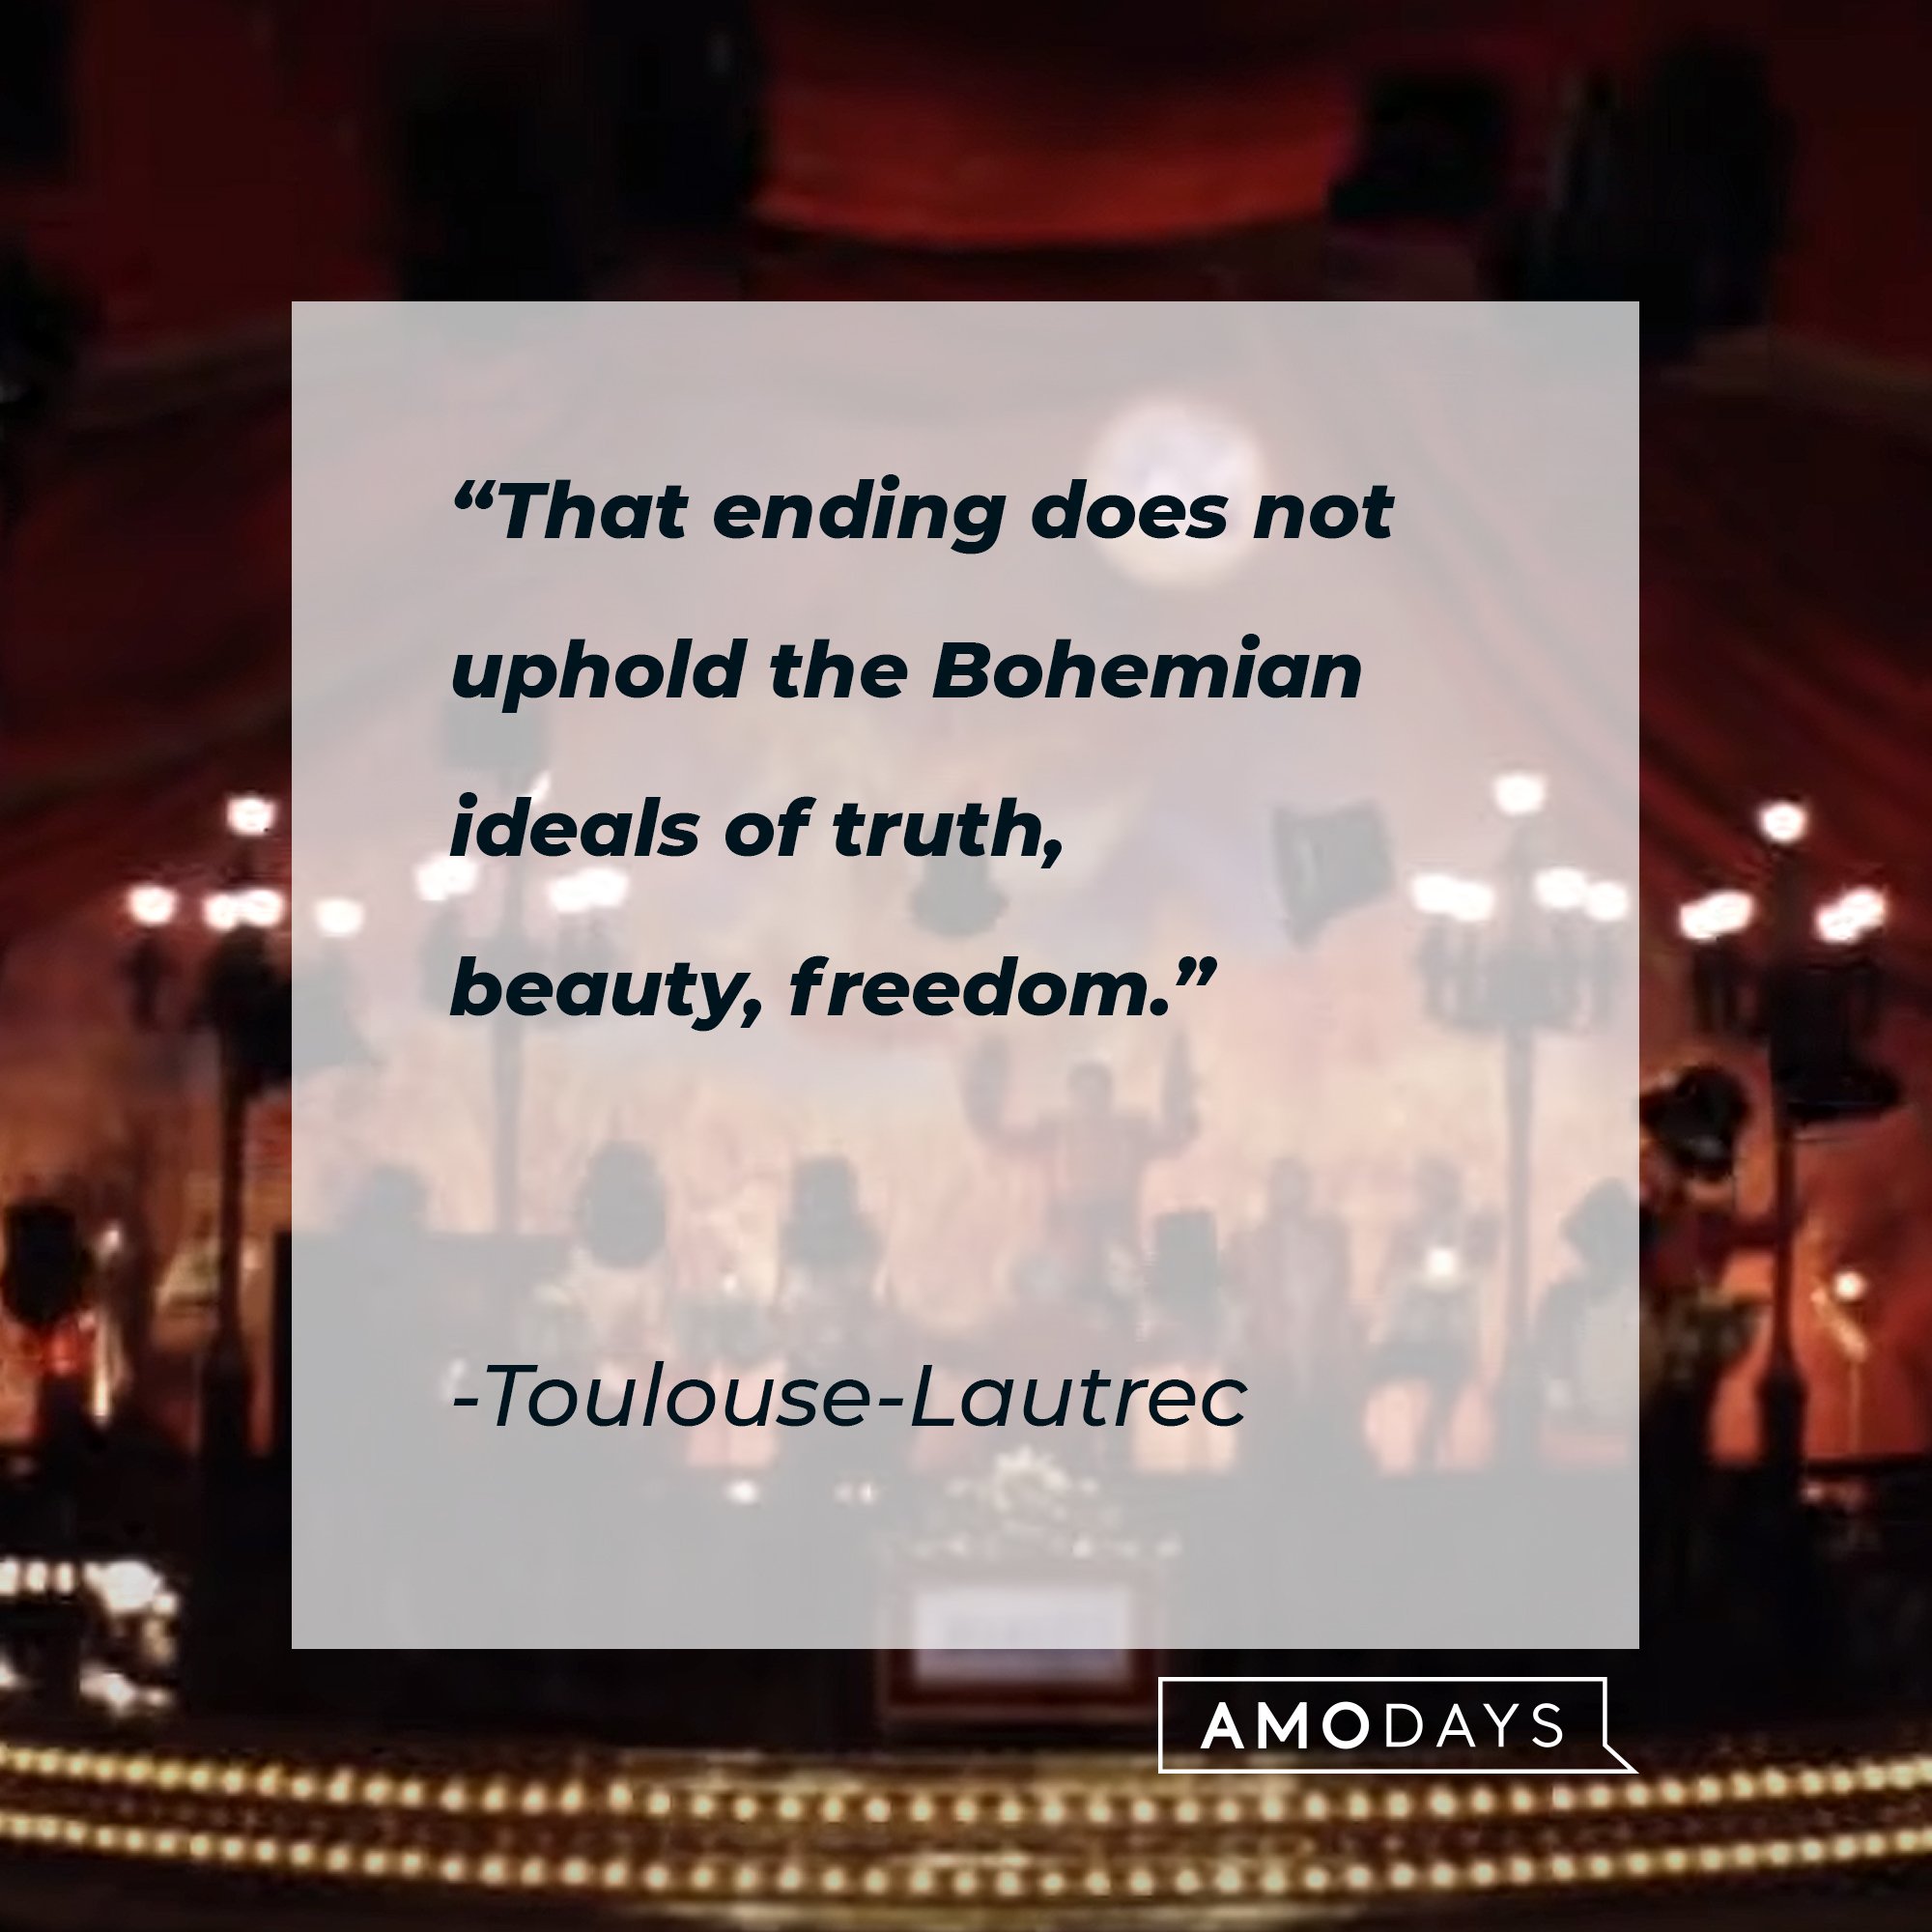   Toulouse-Lautrec's quote: "That ending does not uphold the Bohemian ideals of truth, beauty, freedom." | Image: AmoDays